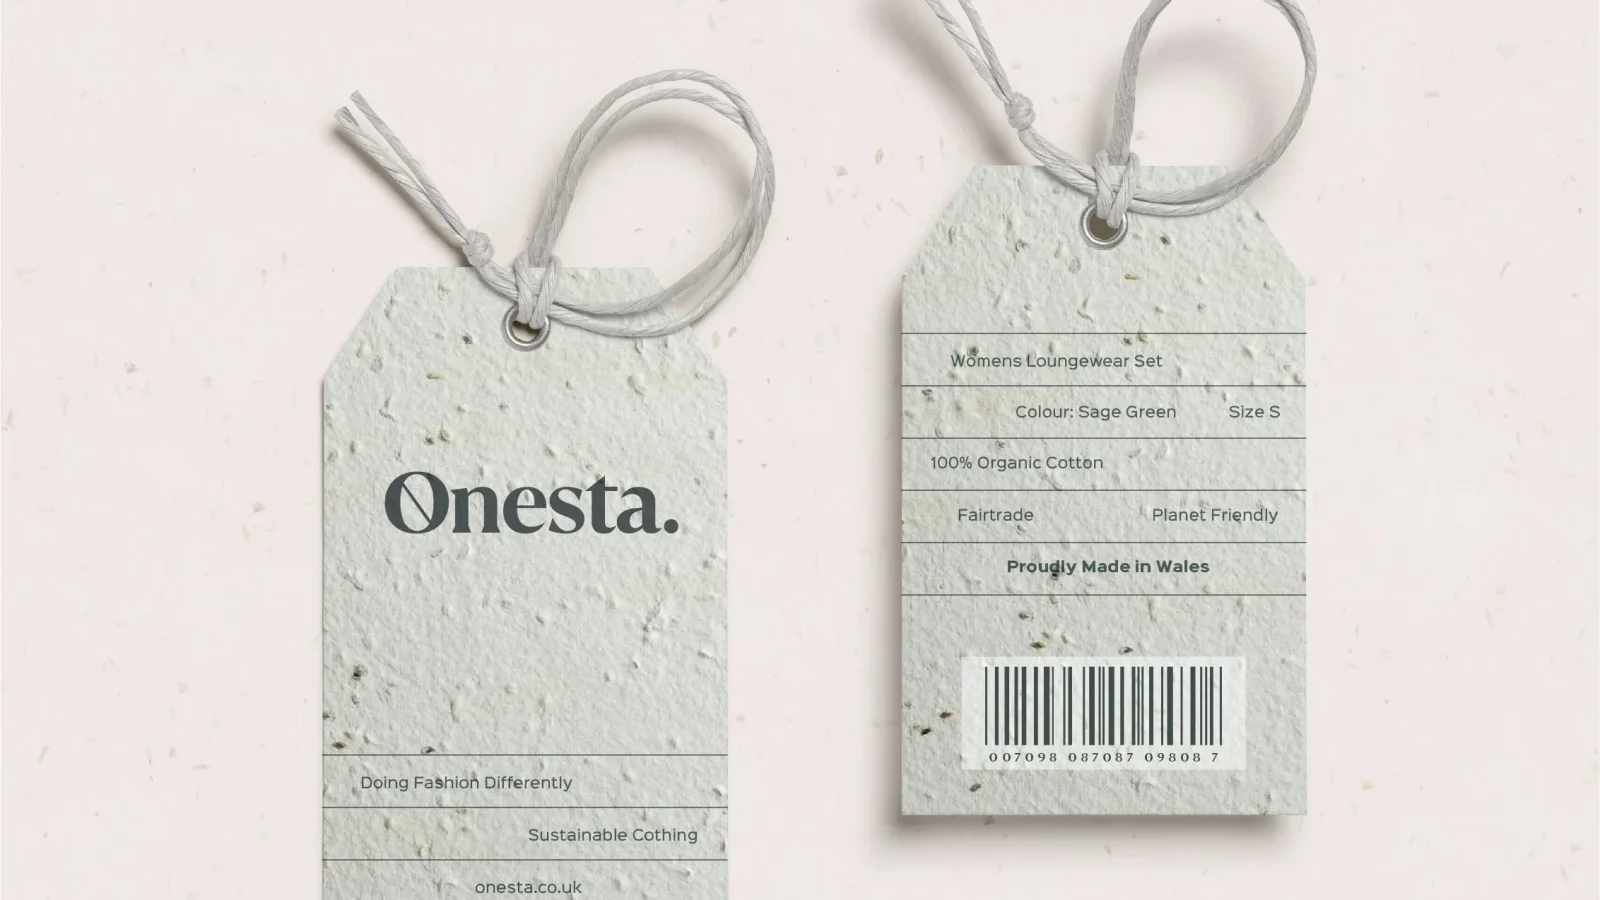 Two clothing tags designed by a design agency in Wales for the Onesta brand on a speckled paper background. One shows the front with the brand logo, and the other displays sizing, material information